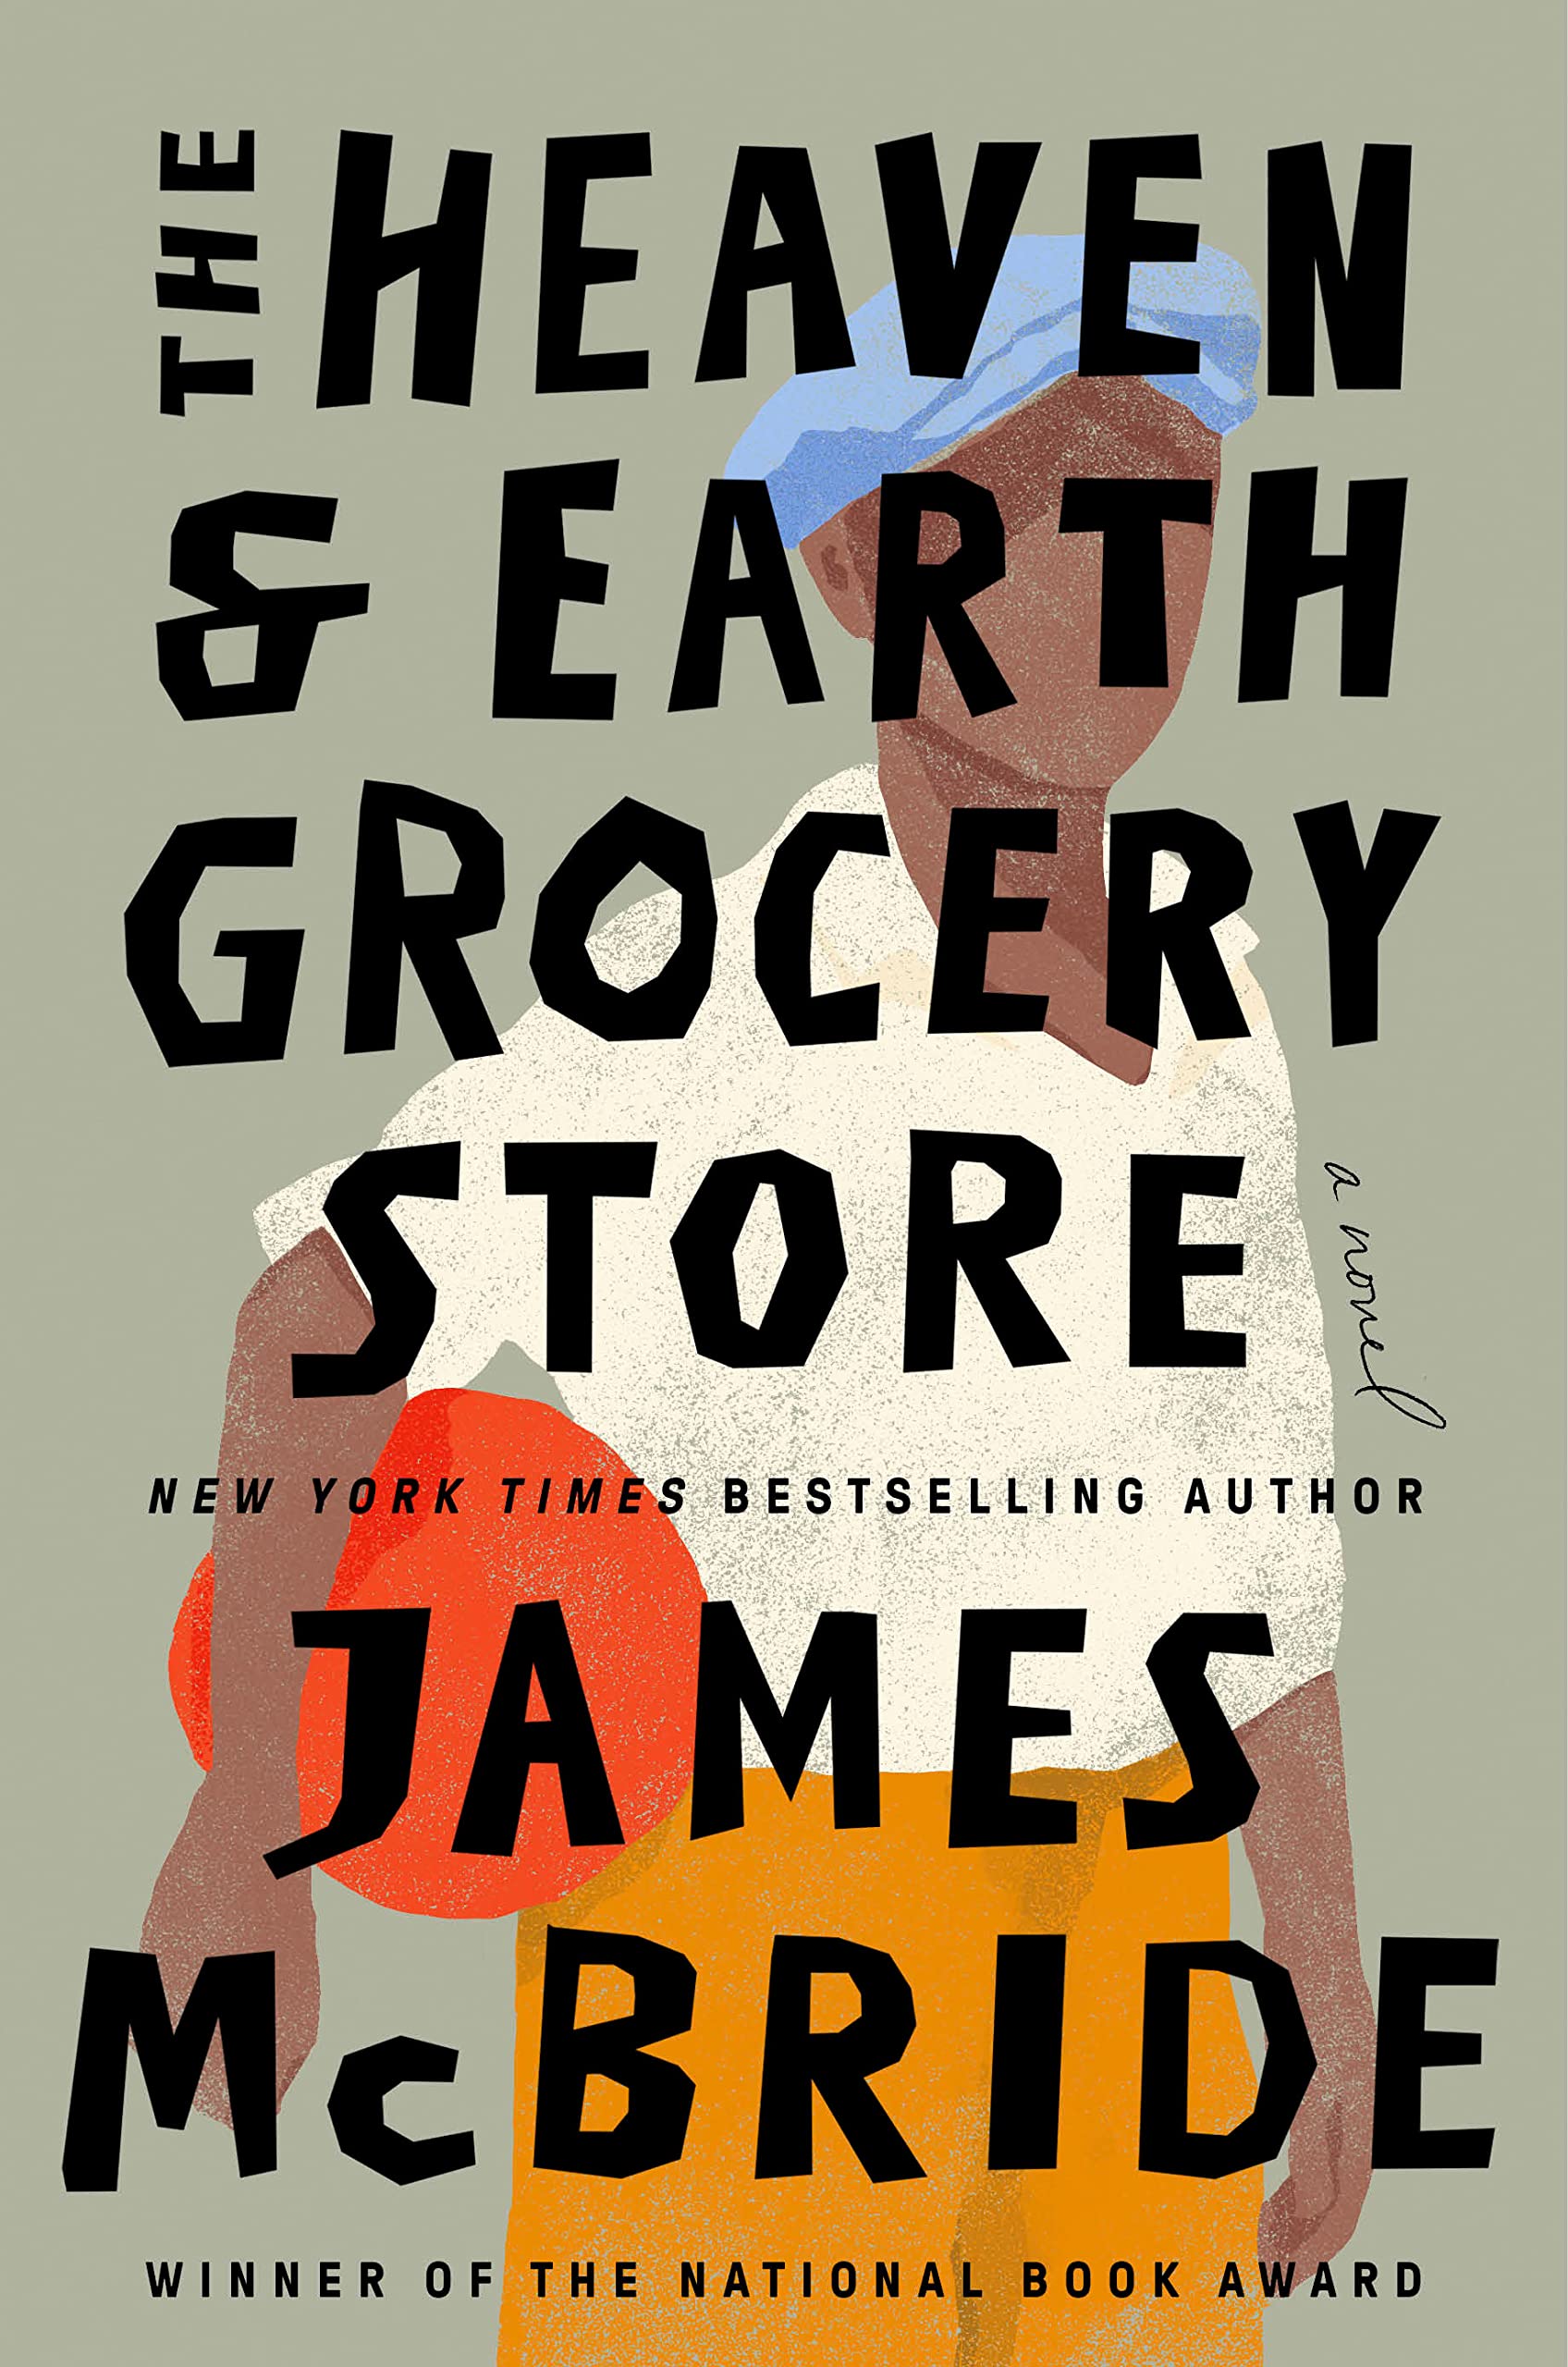 Image for "The Heaven and Earth Grocery Store"